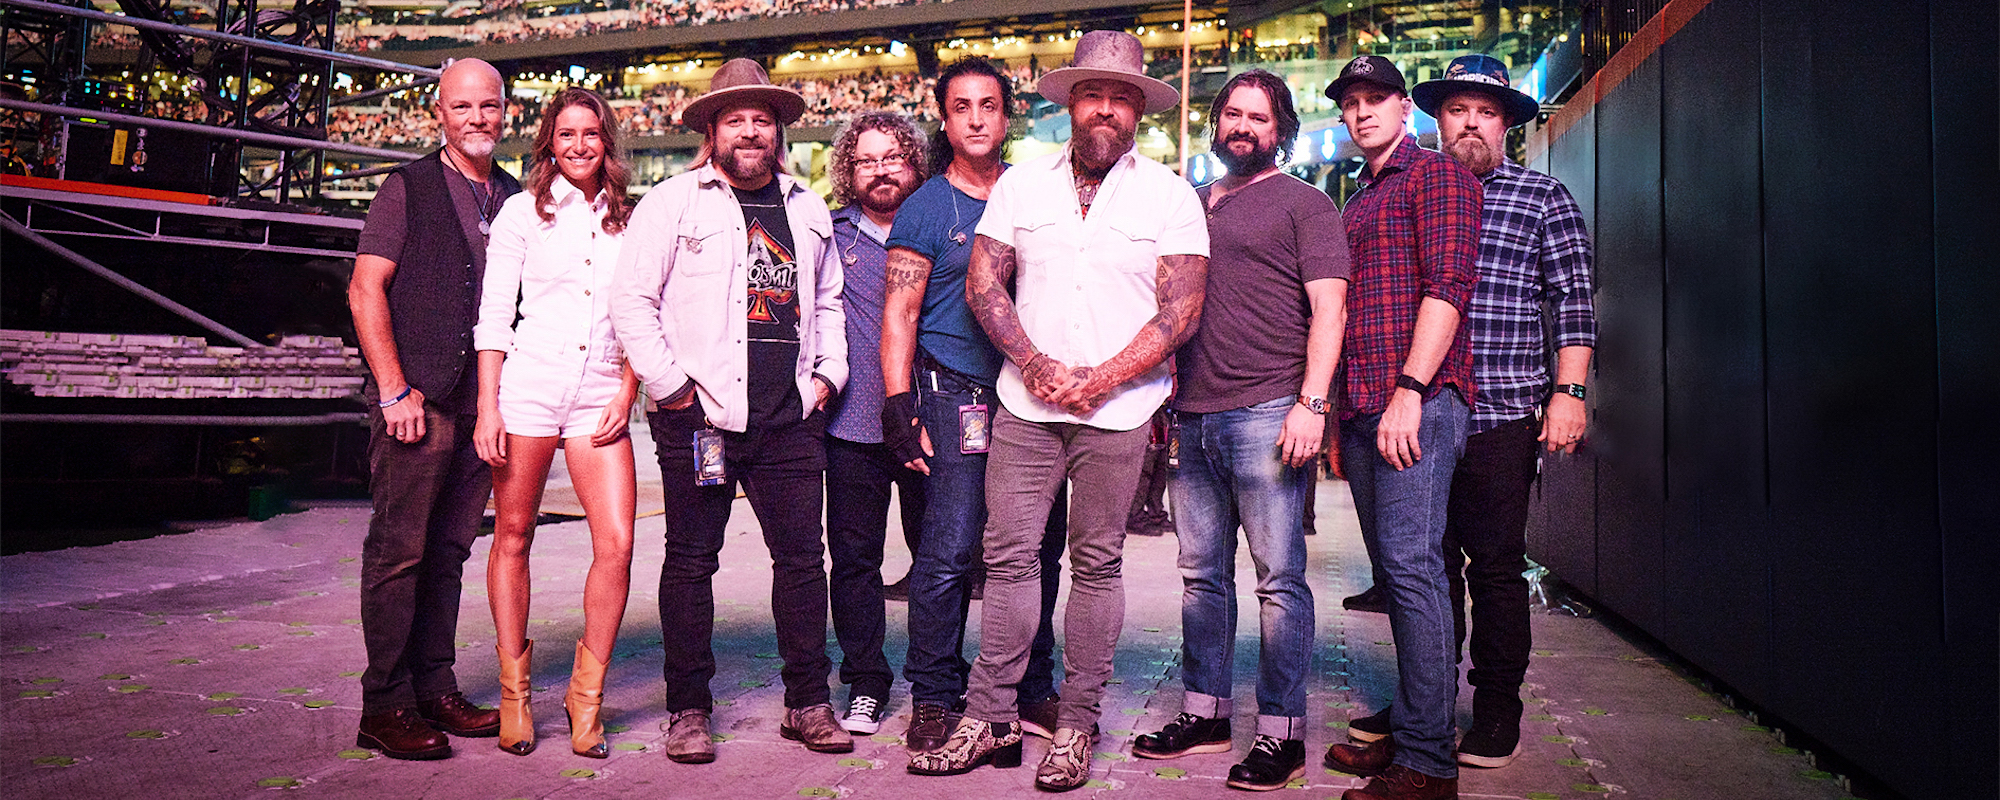 Zac Brown Band Previews New Live Album with “Bohemian Rhapsody” Cover